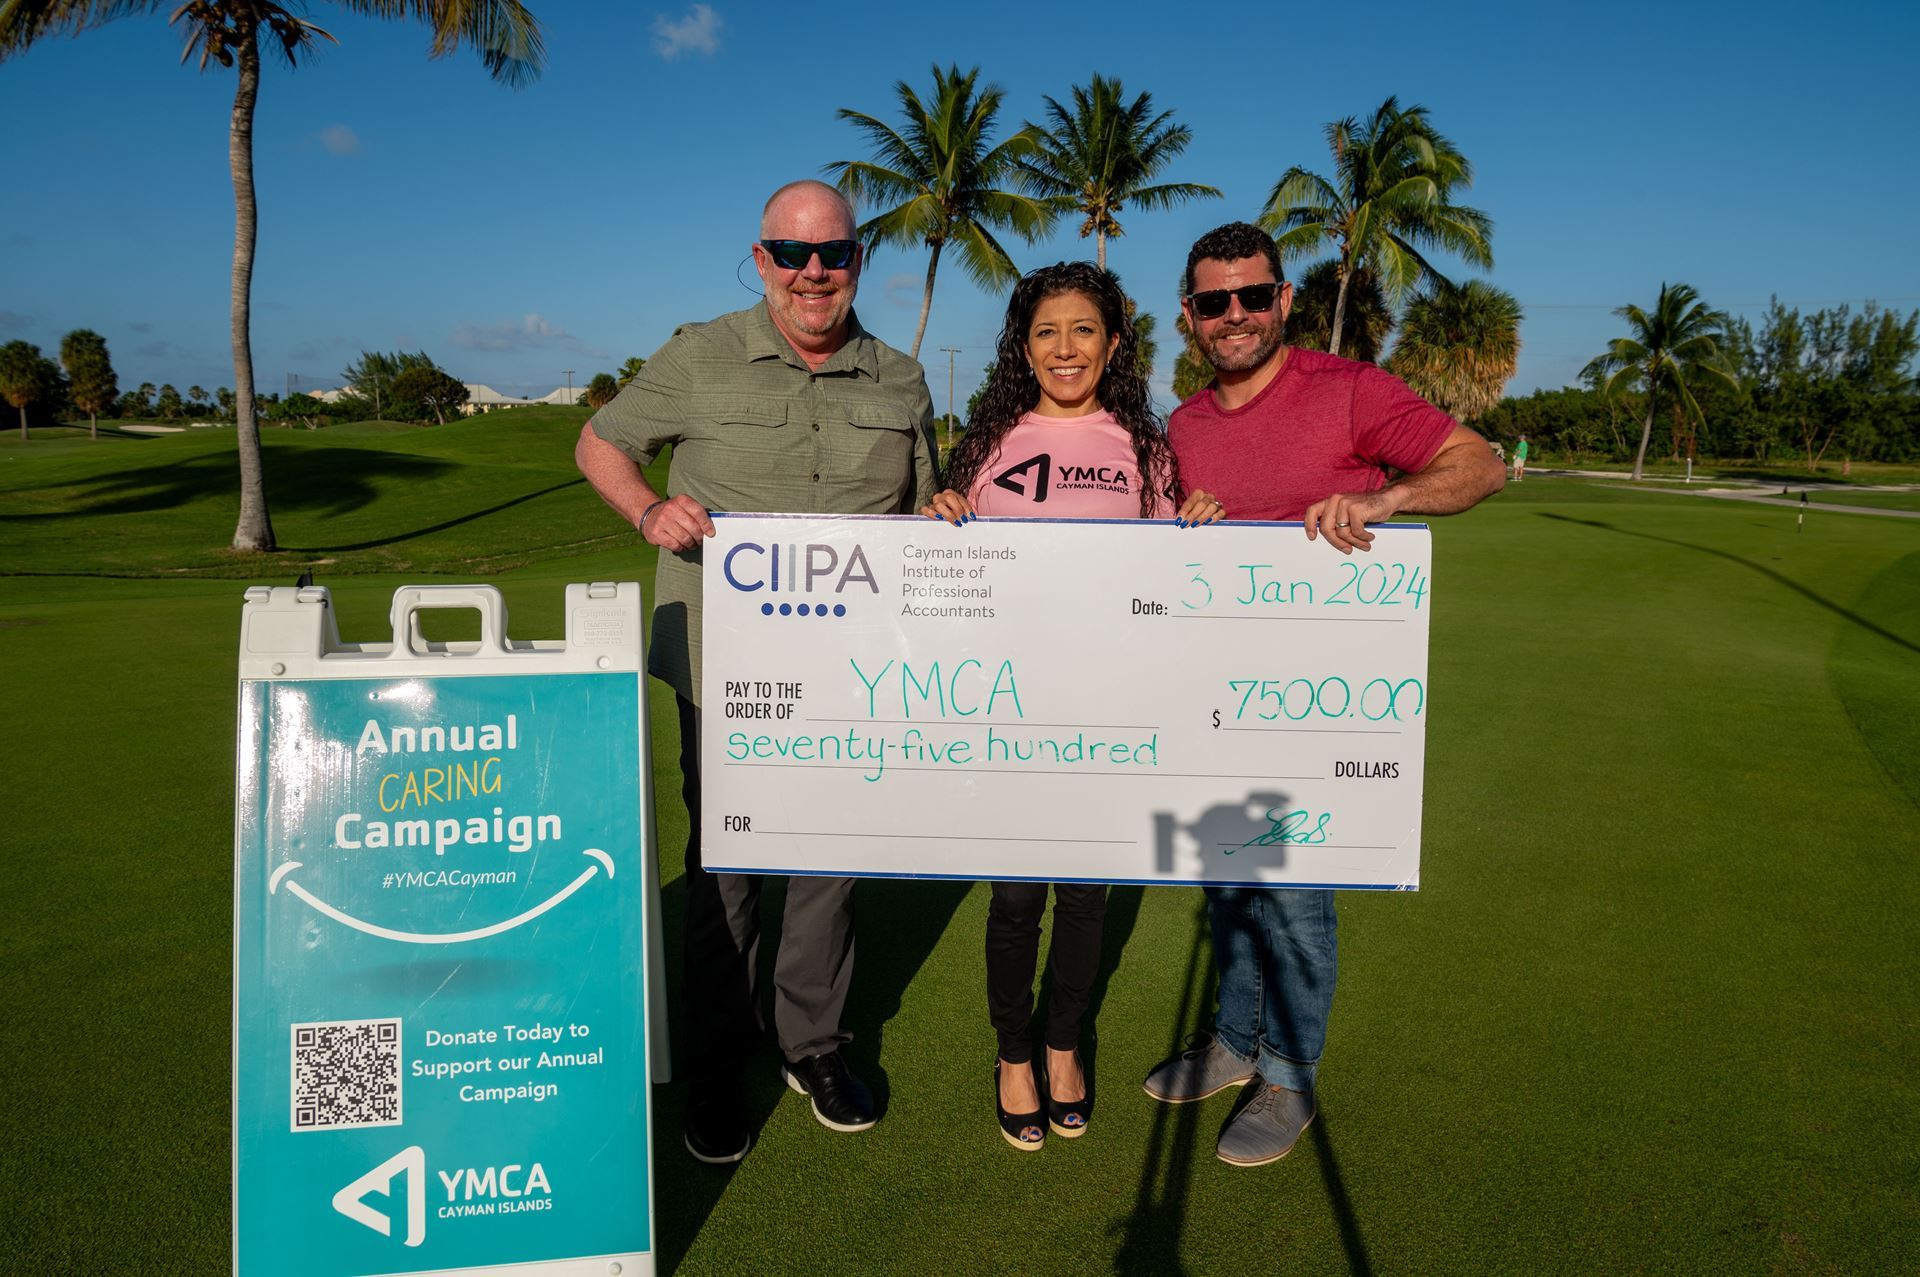 CIIPA's Kevin Morales, right, poses with YMCA's Paola Robinson and Jeff Peterson during a cheque handover photo. 